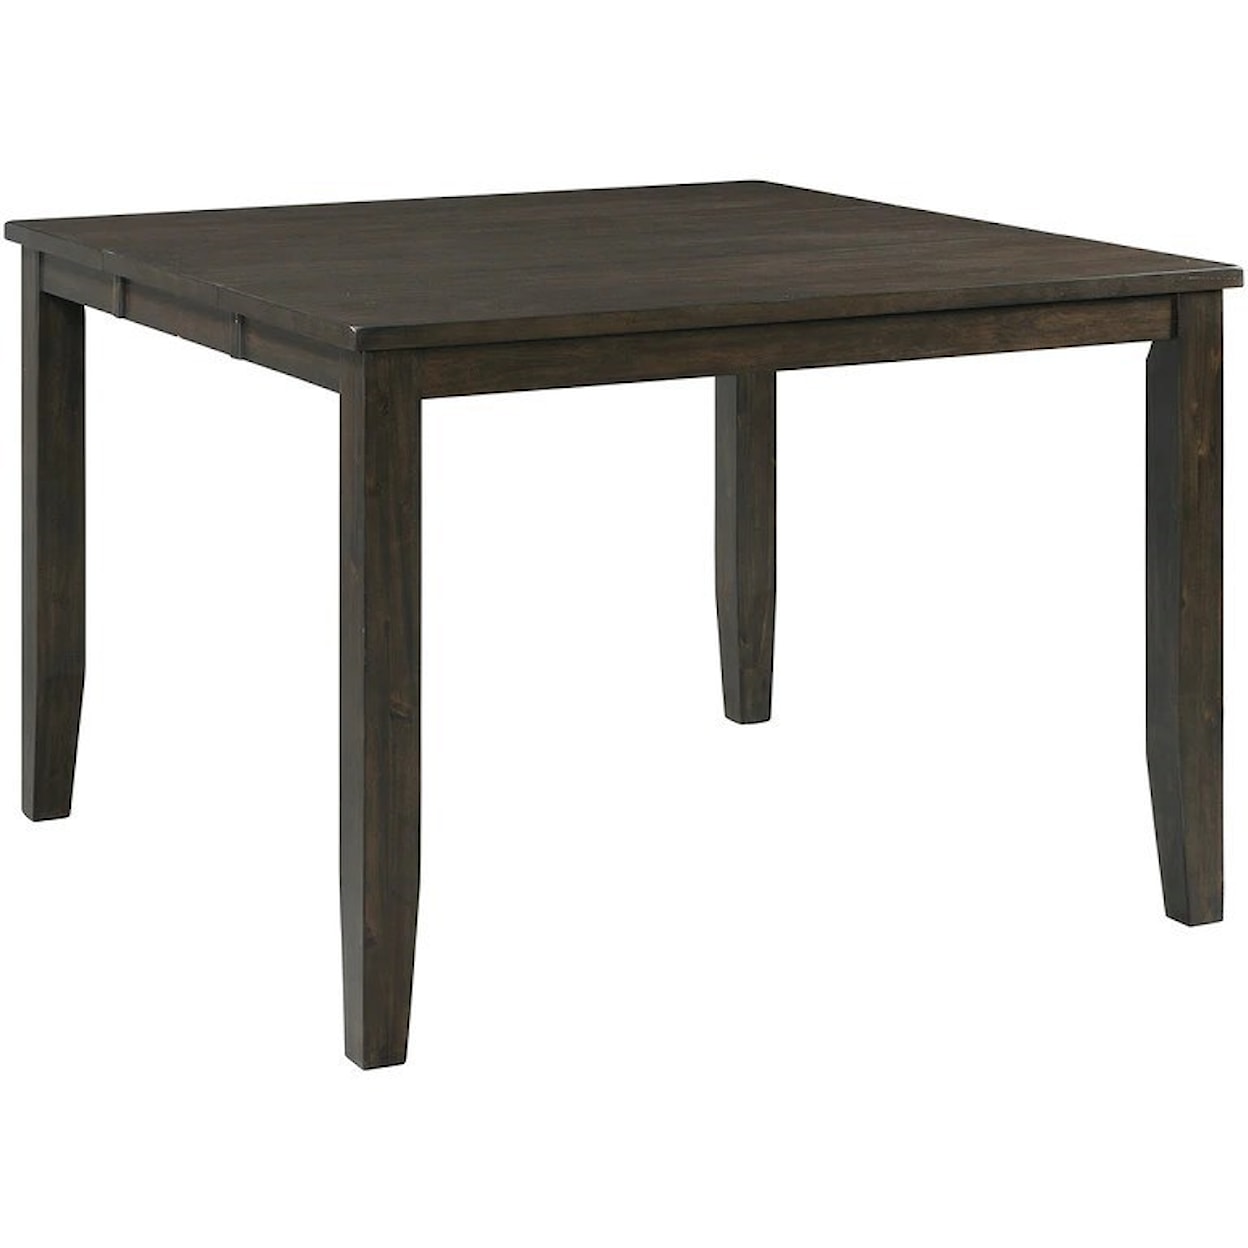 Elements International Mango Counter Height Table